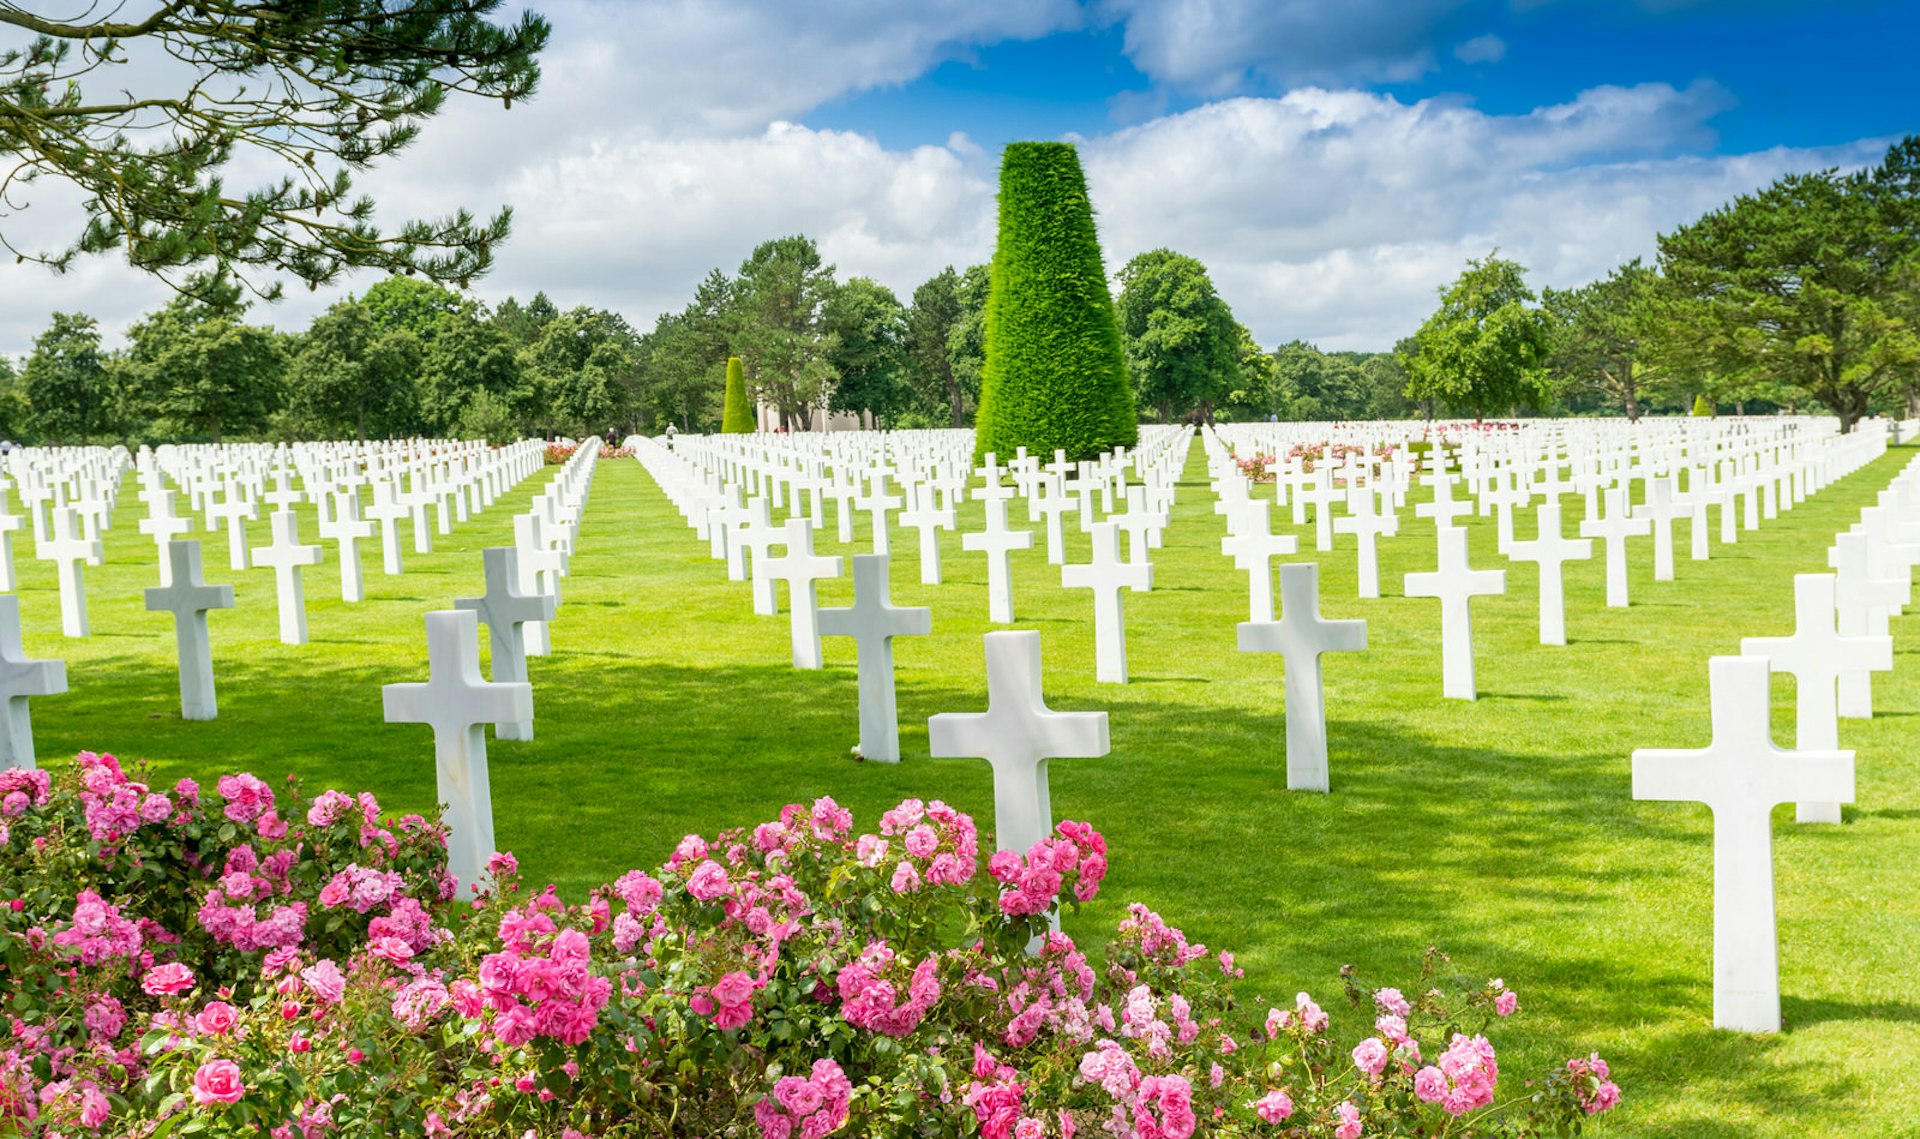 Trees and pink flowers next to a field of white crosses at the American cemetery in Colleville-sur-Mer